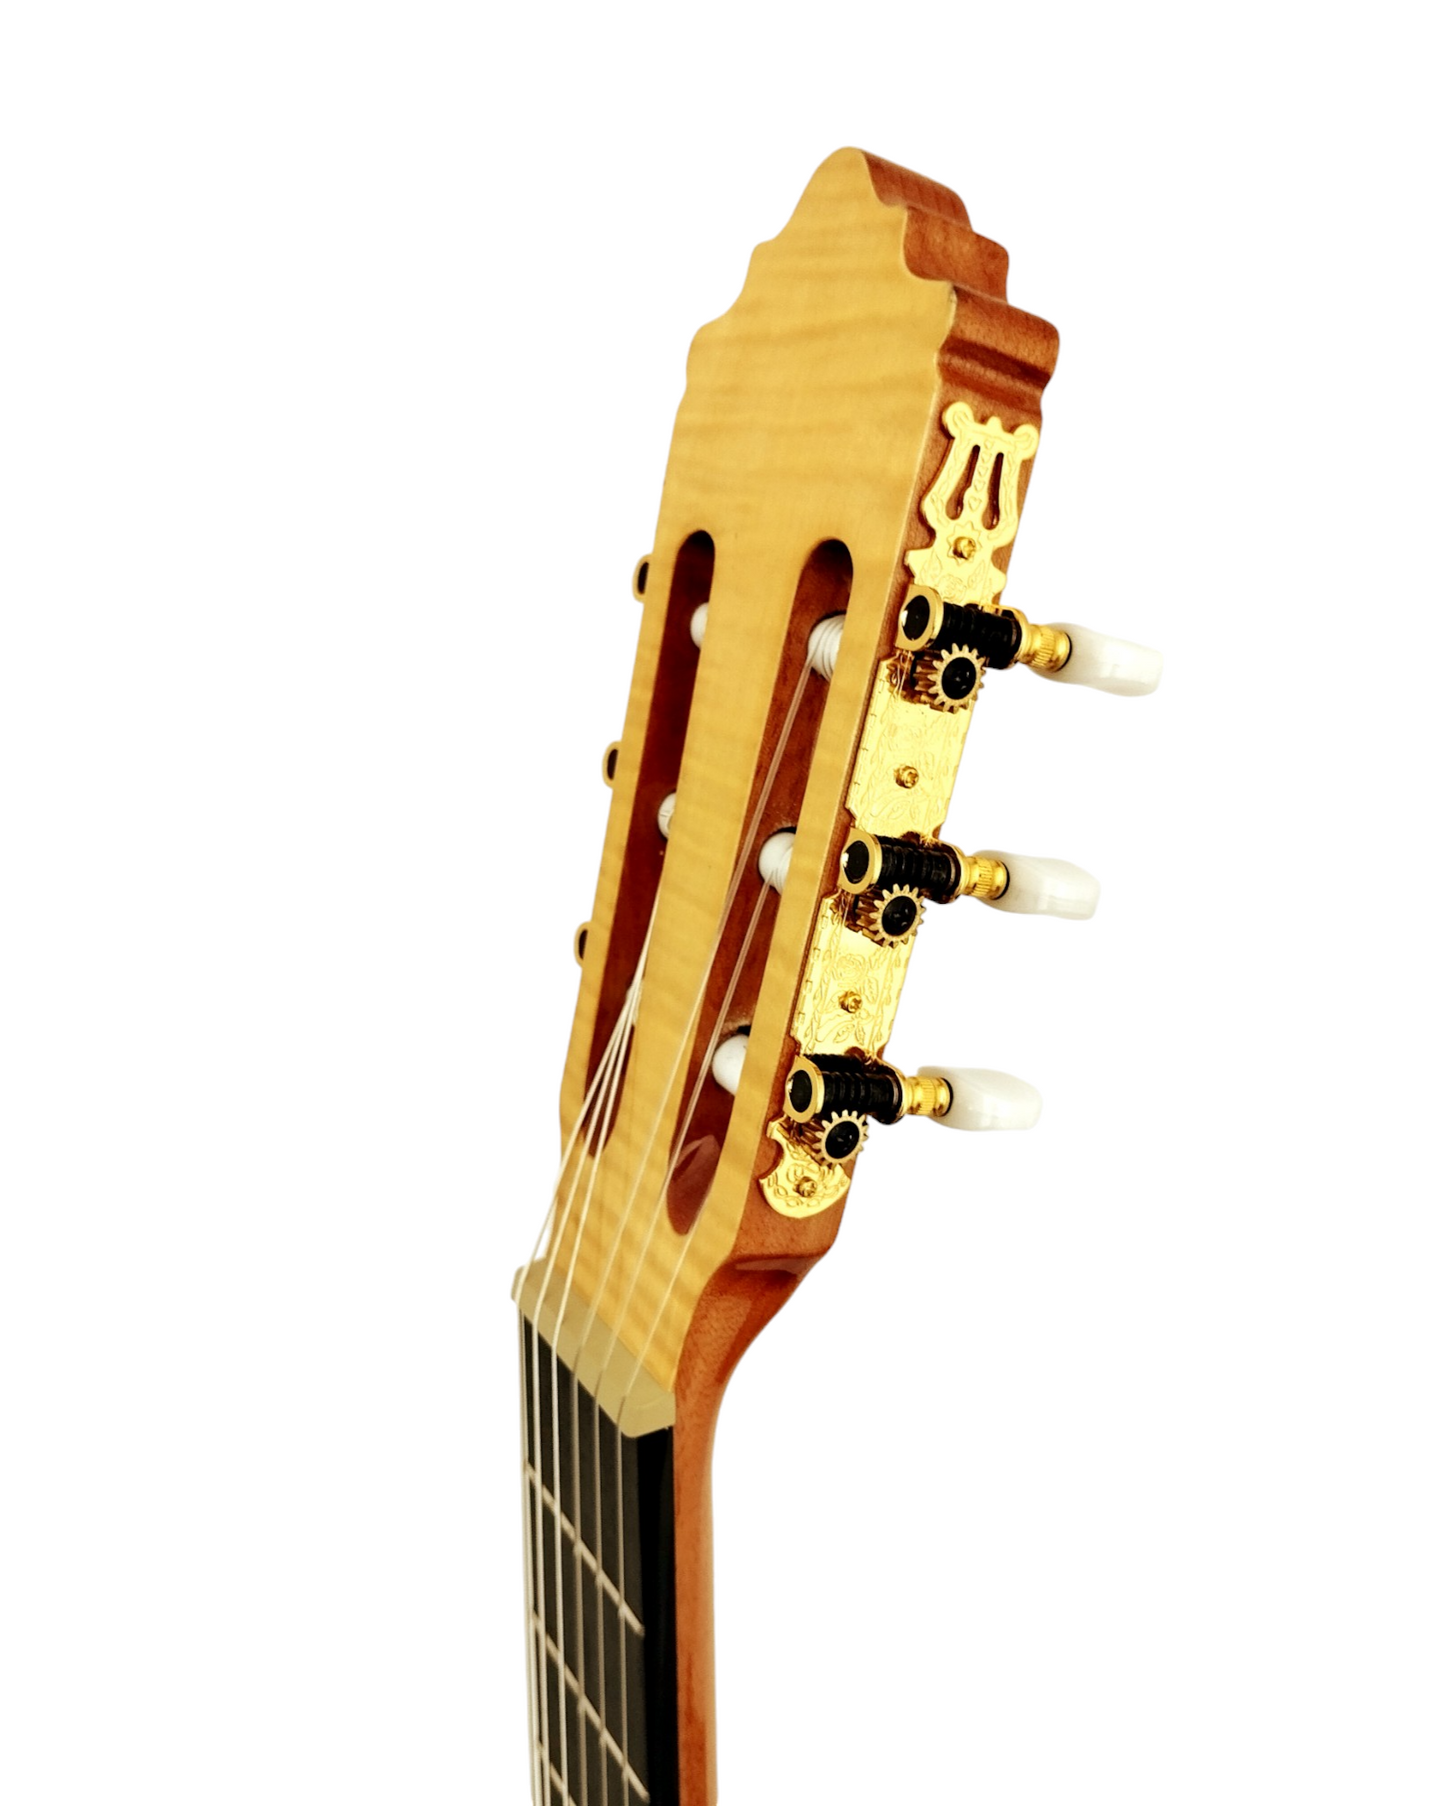 The SCG-953BCN Classical Guitar with Bowled Back – Redefining Tradition with Unparalleled Style and Sound"